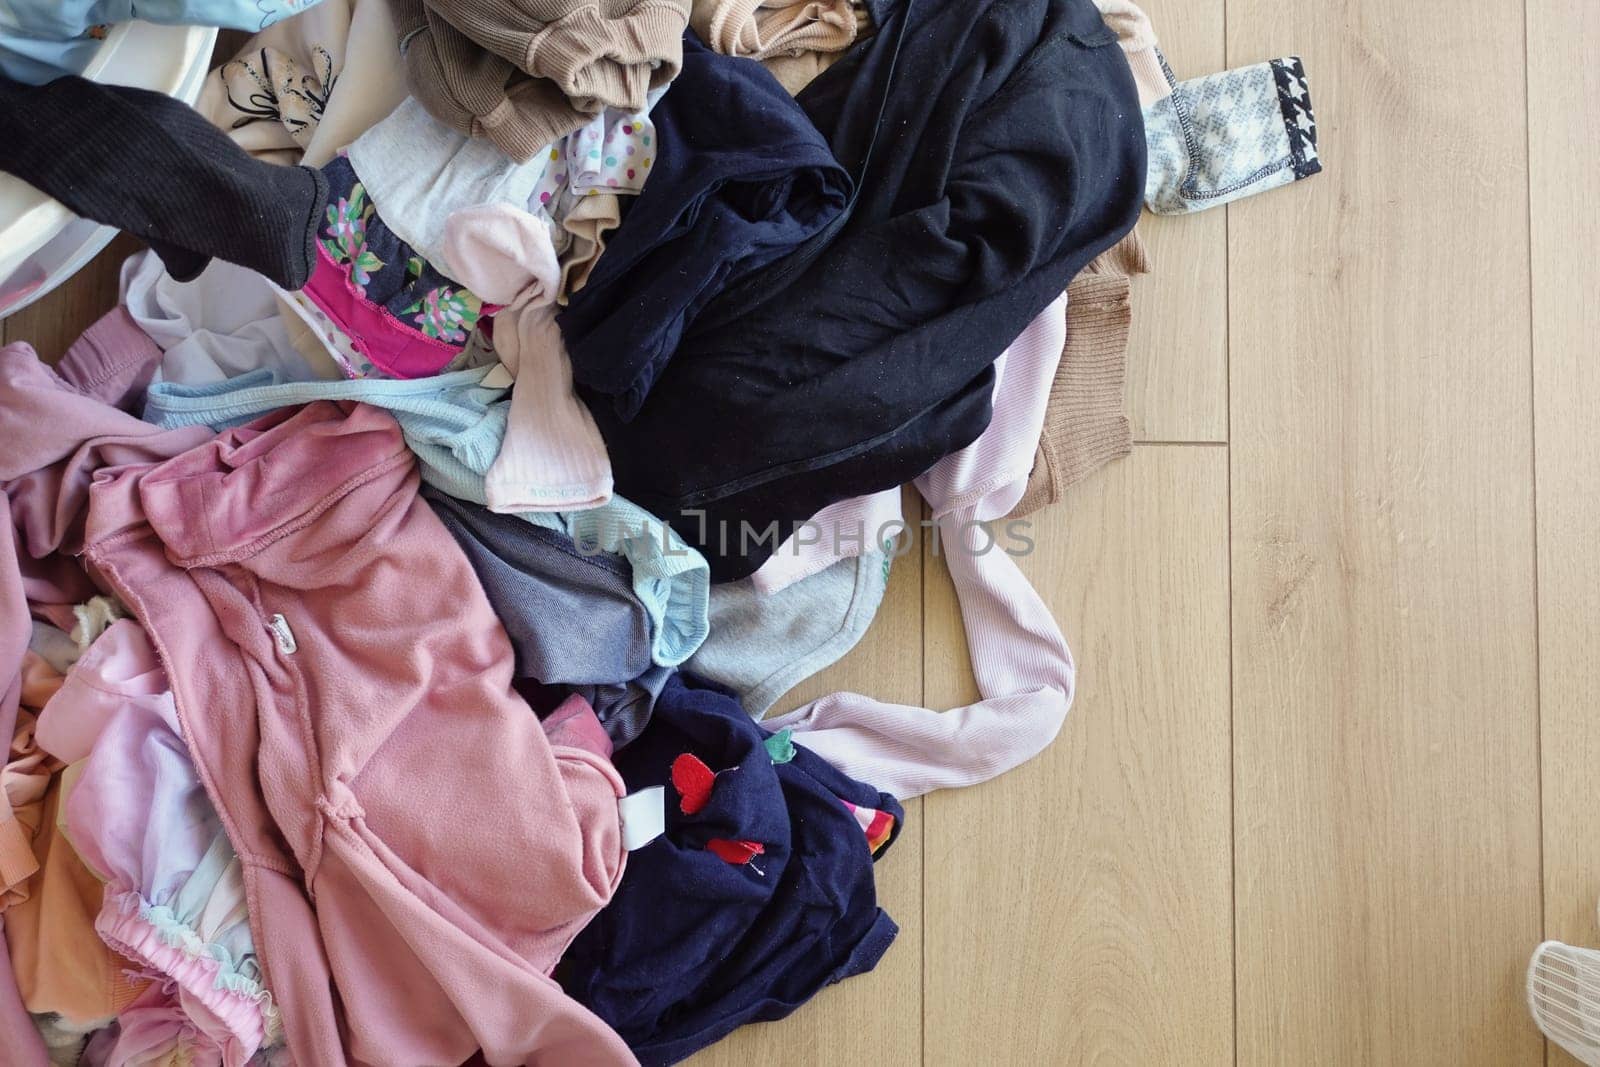 Clothes pile next to laundry basket filled with garments, on hardwood floor.